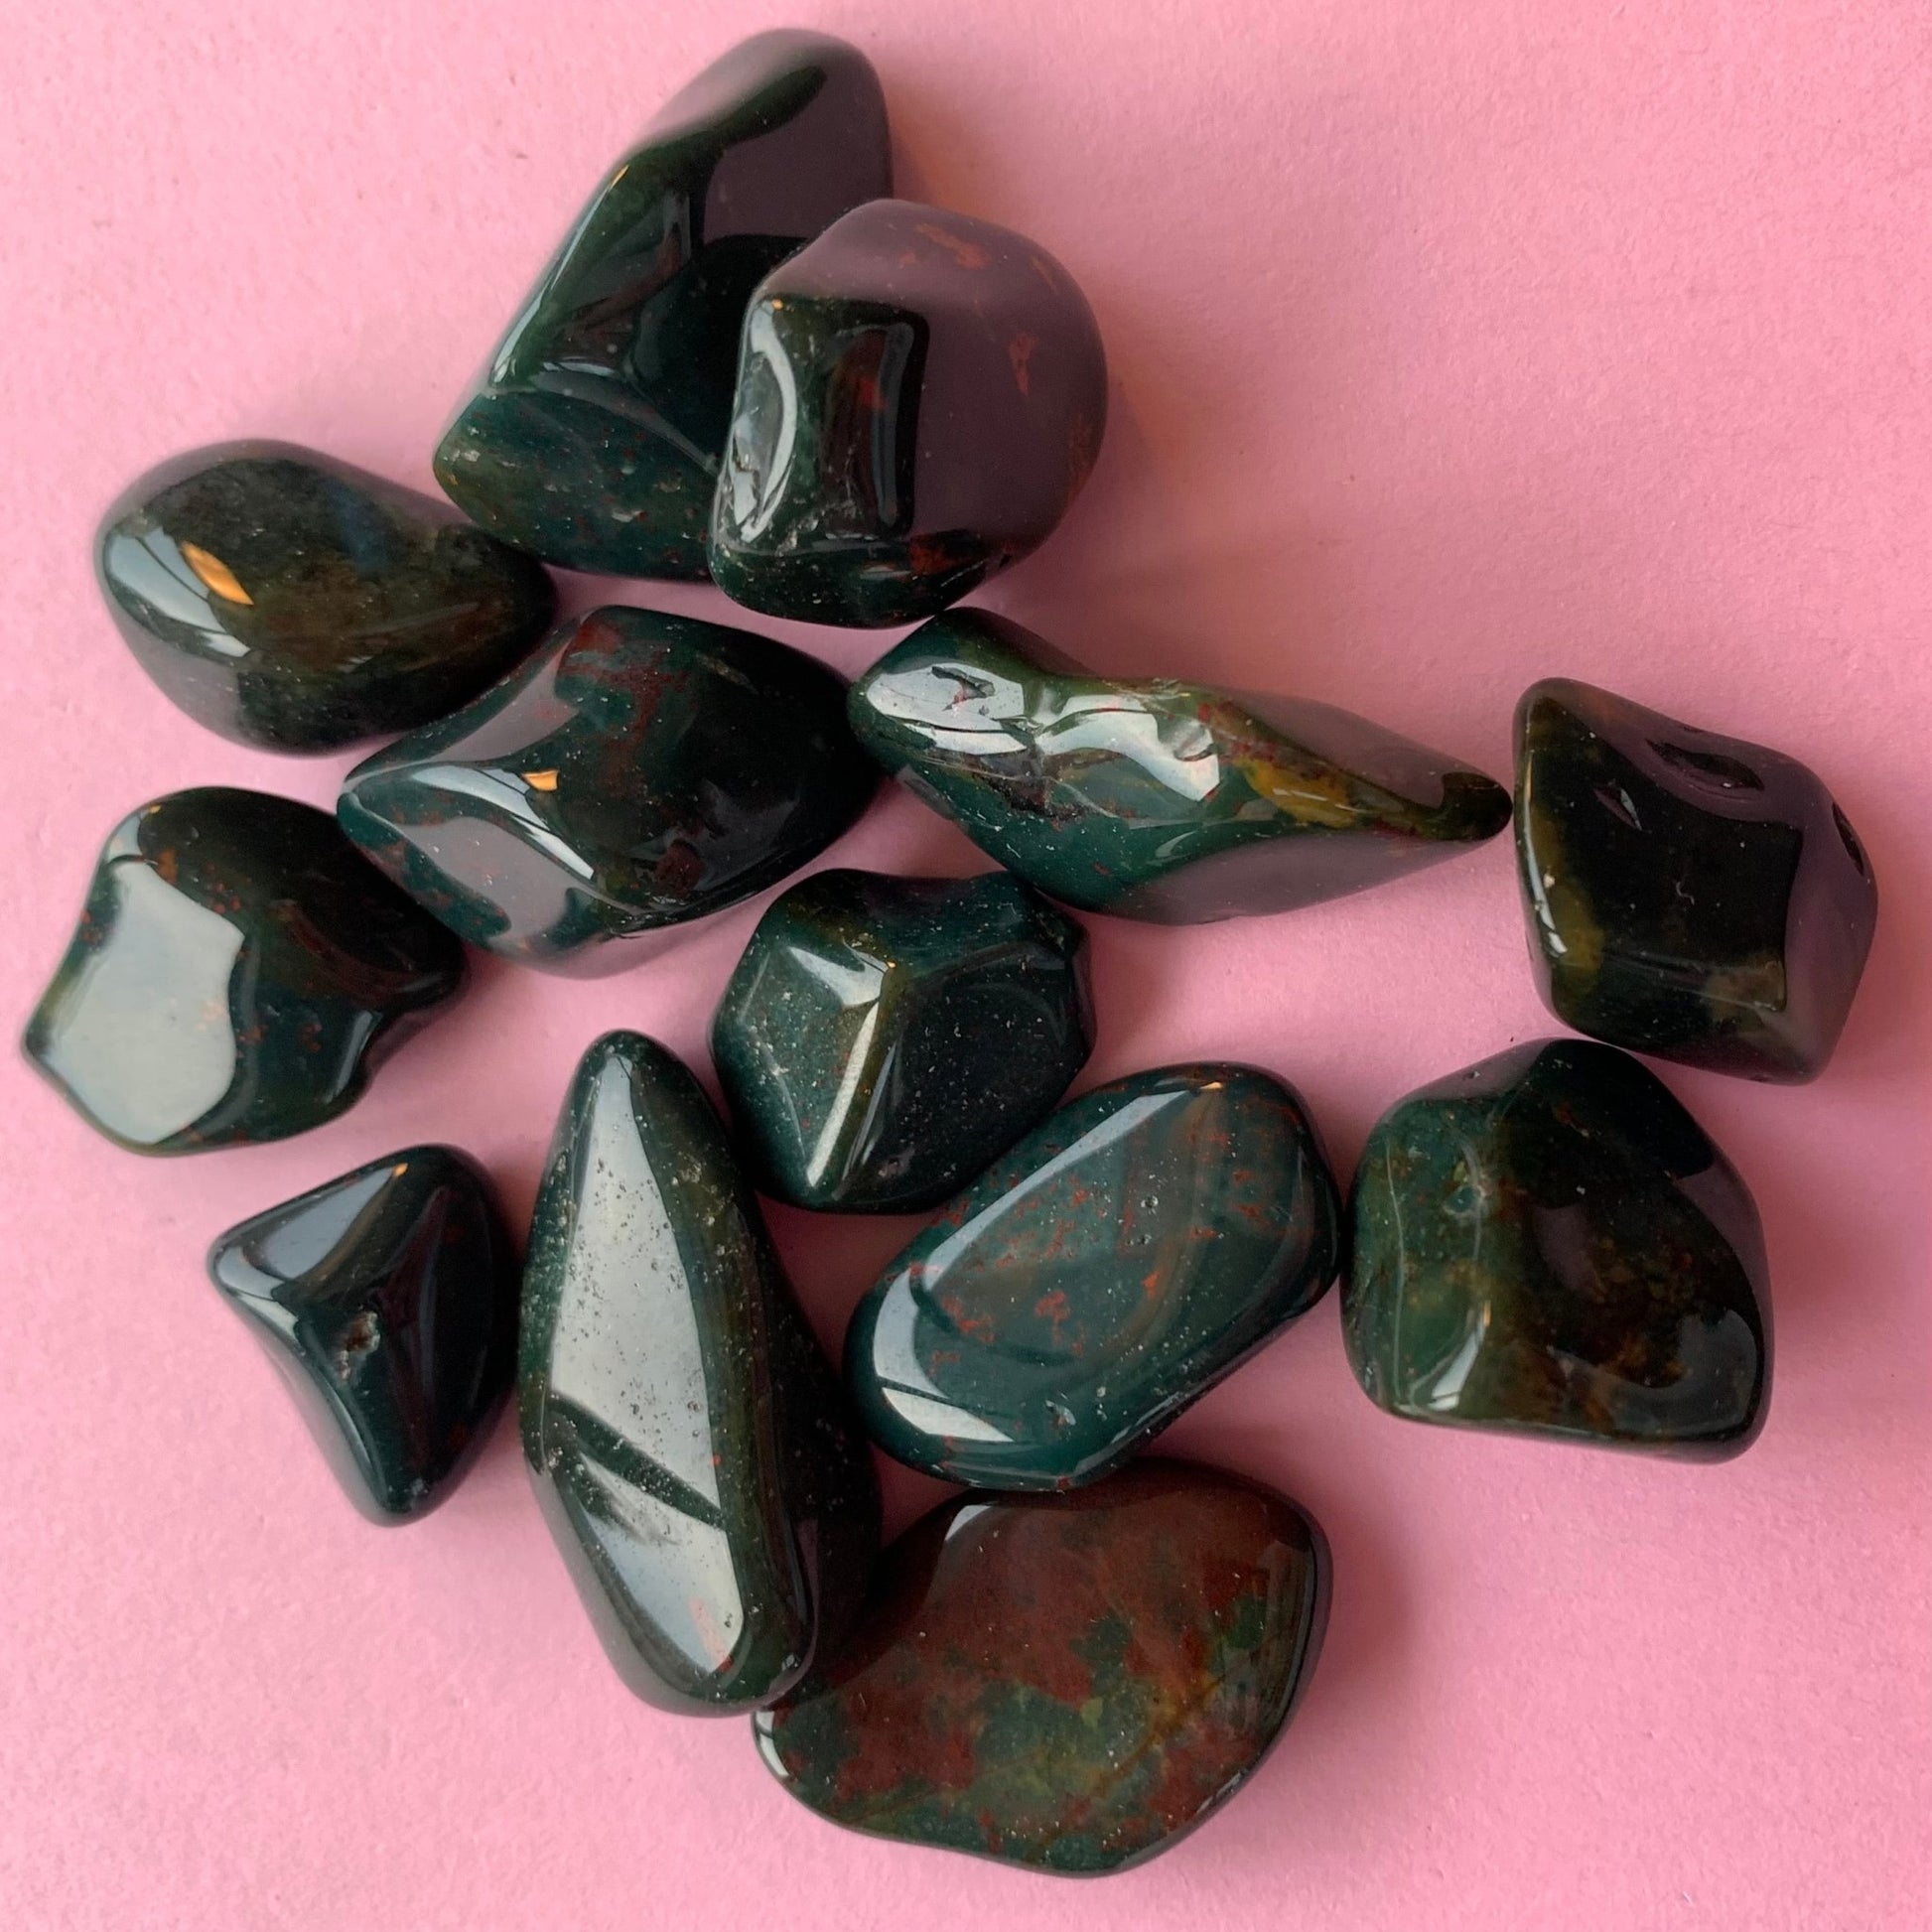 Bloodstone Tumble - Conscious Crystals New Zealand Crystal and Spiritual Shop